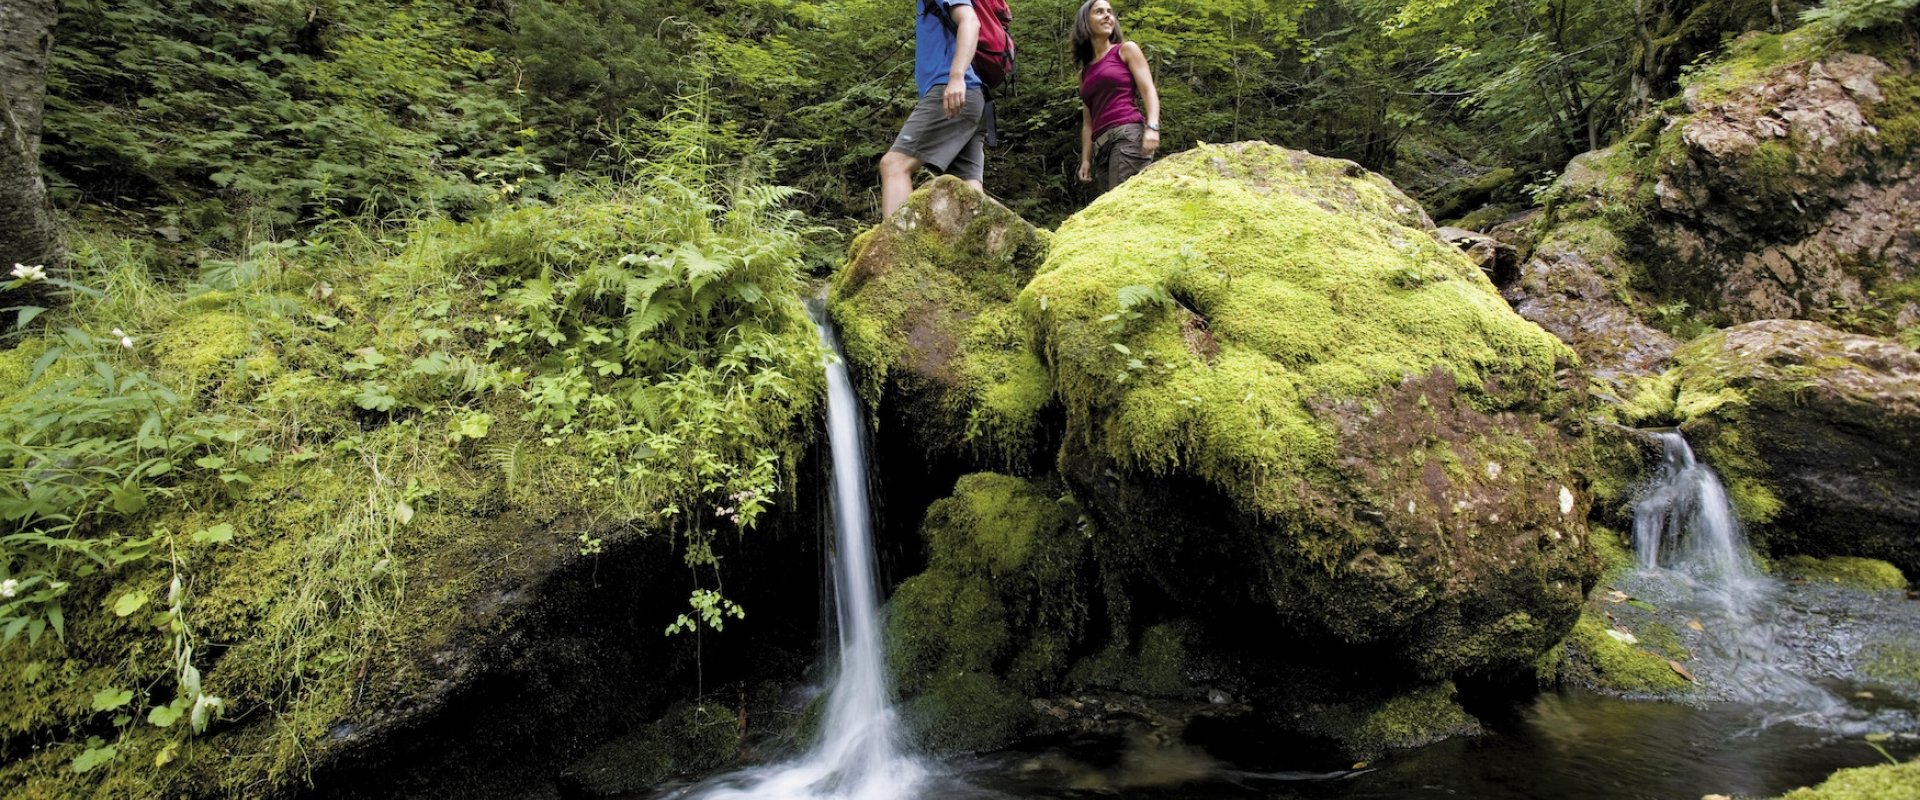 Two hikers pass by a small waterfall in a lush environment